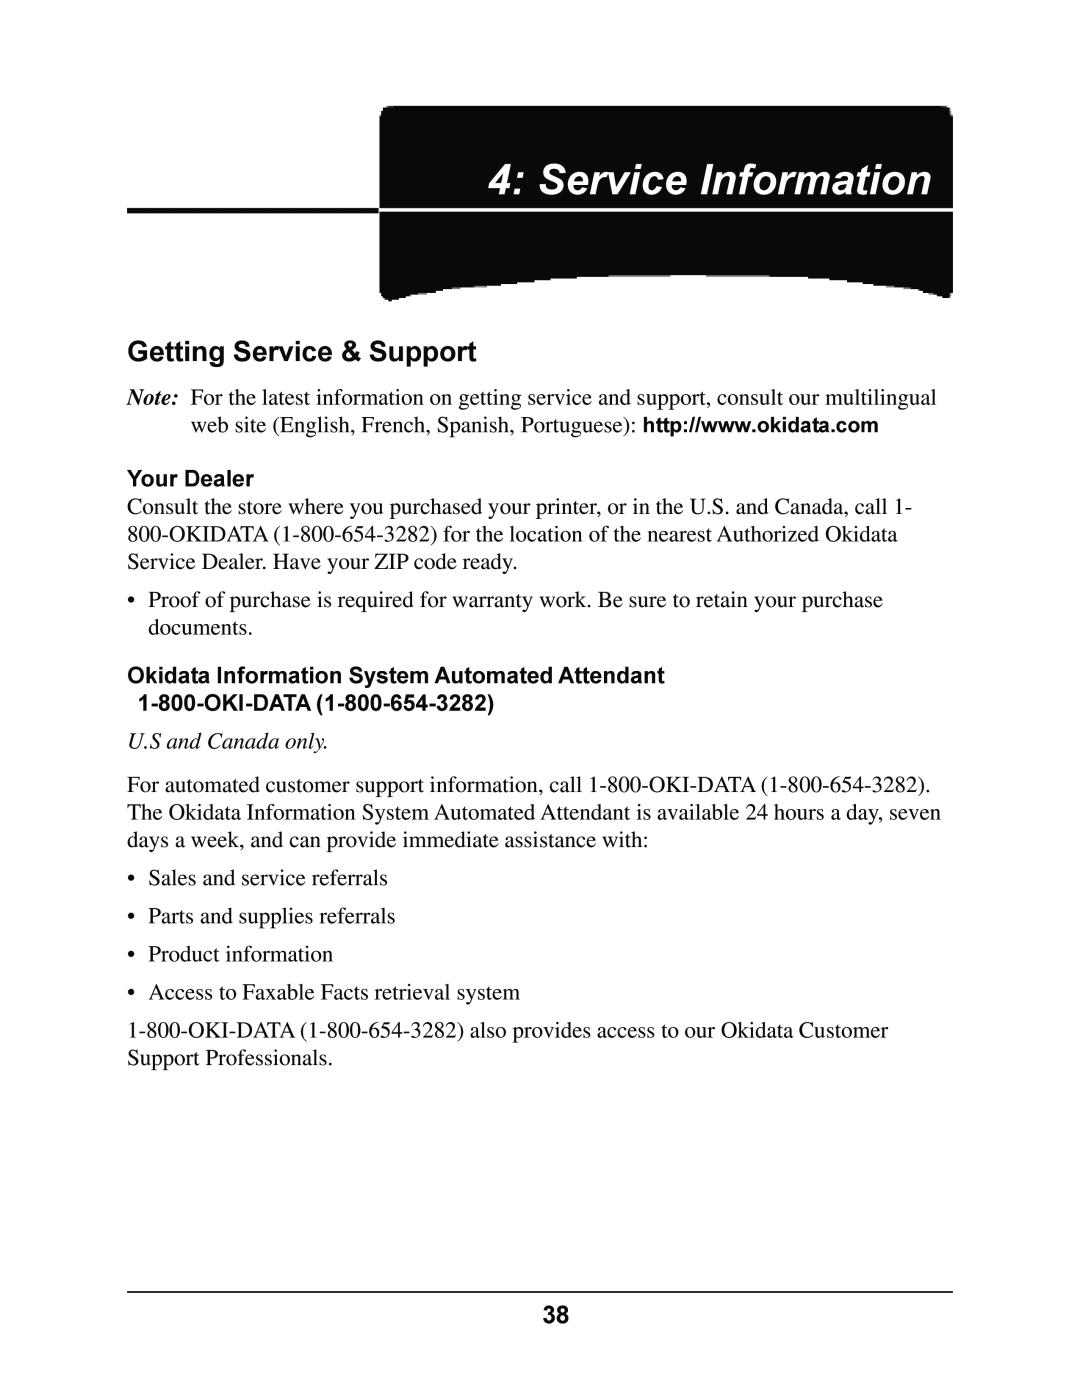 Oki 4410 manual Service Information, Getting Service & Support, Your Dealer 